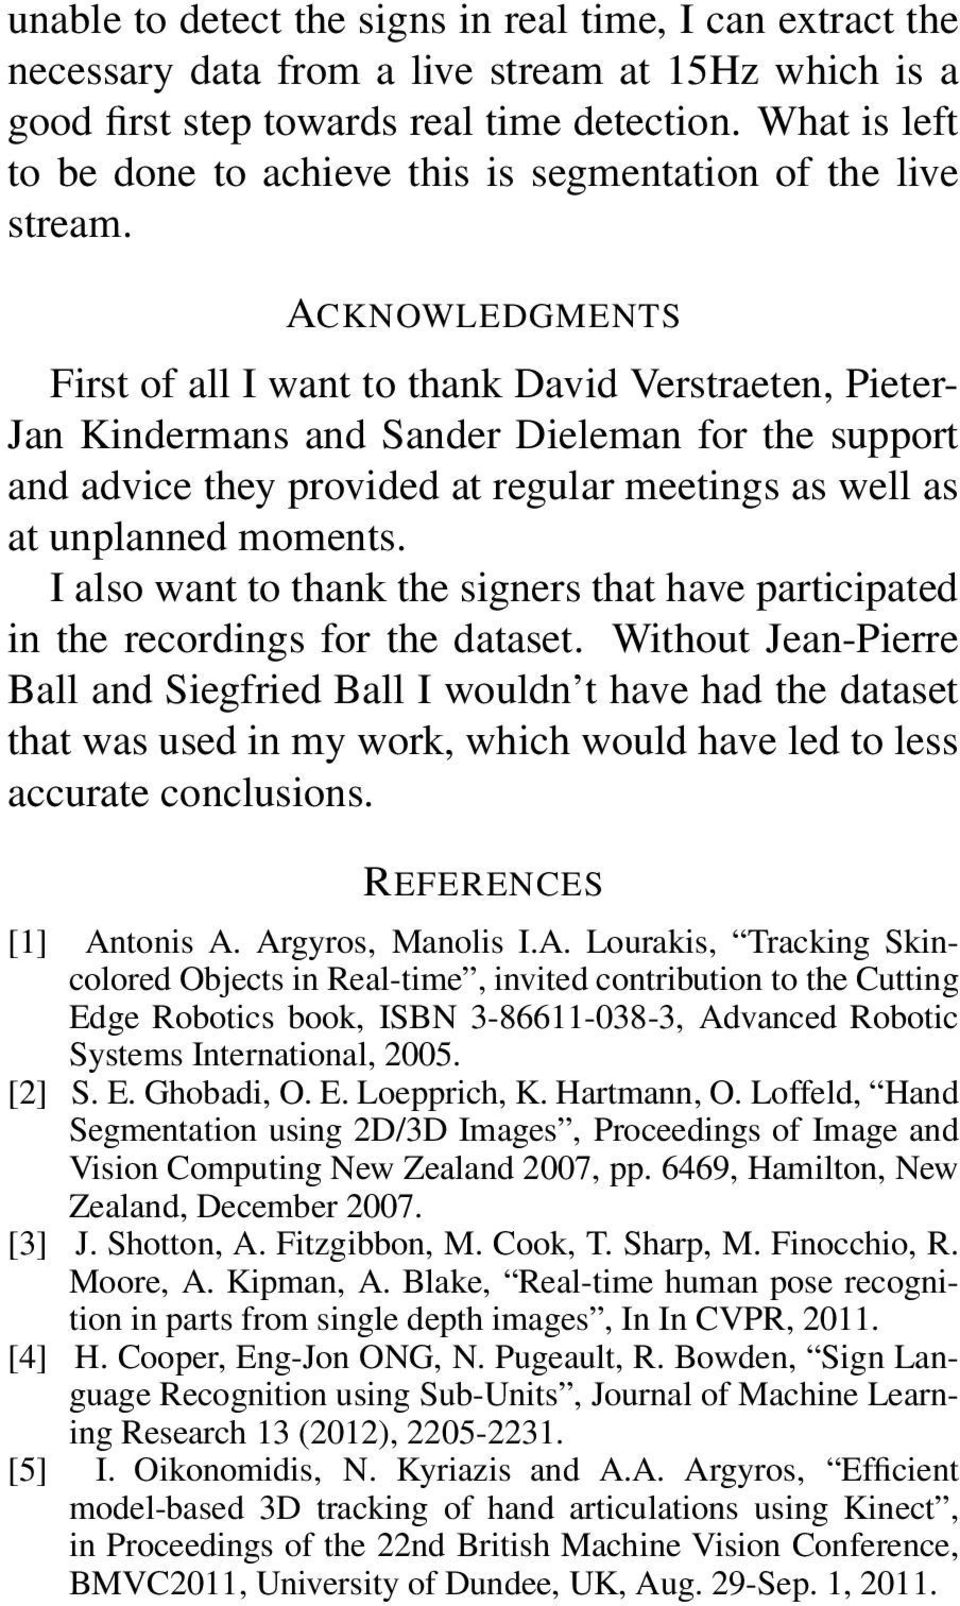 ACKNOWLEDGMENTS First of all I want to thank David Verstraeten, Pieter- Jan Kindermans and Sander Dieleman for the support and advice they provided at regular meetings as well as at unplanned moments.